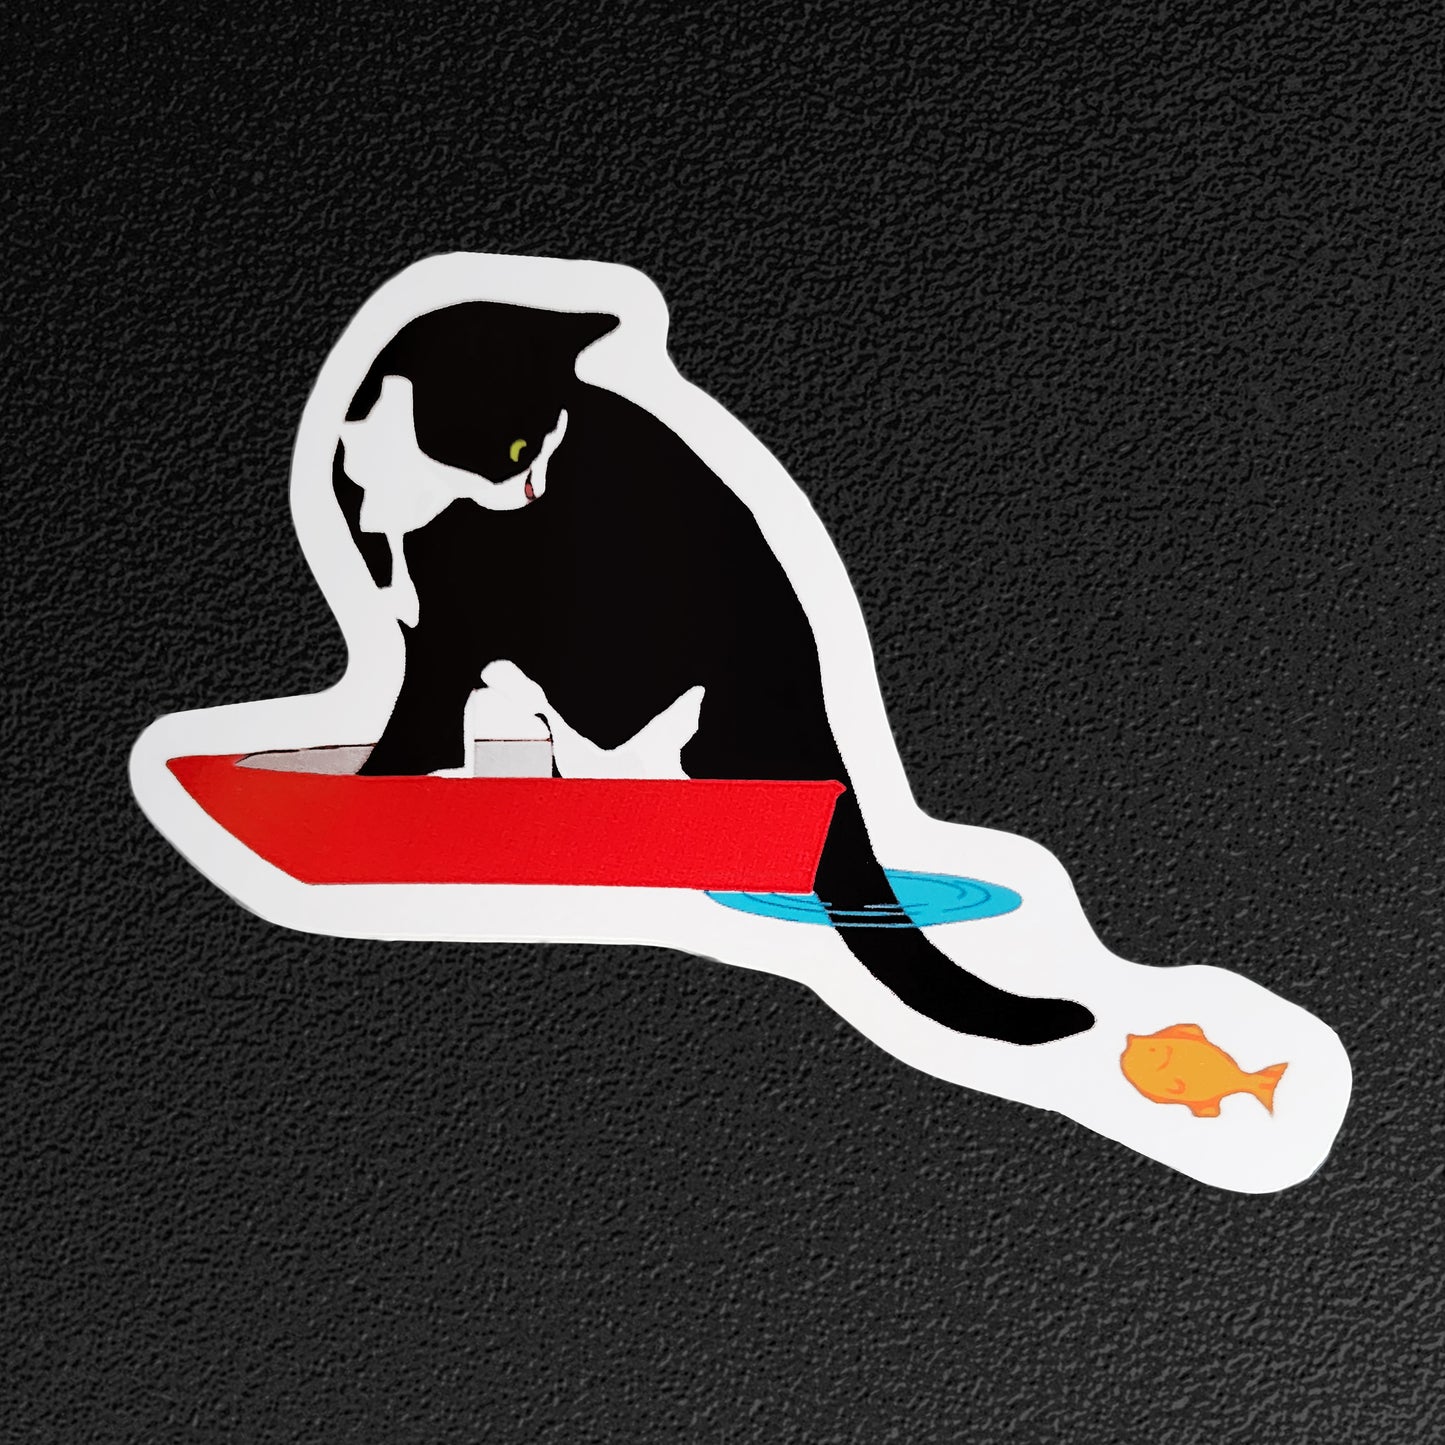 Piper-Pipes Gone Fishing Vinyl Sticker/Decal